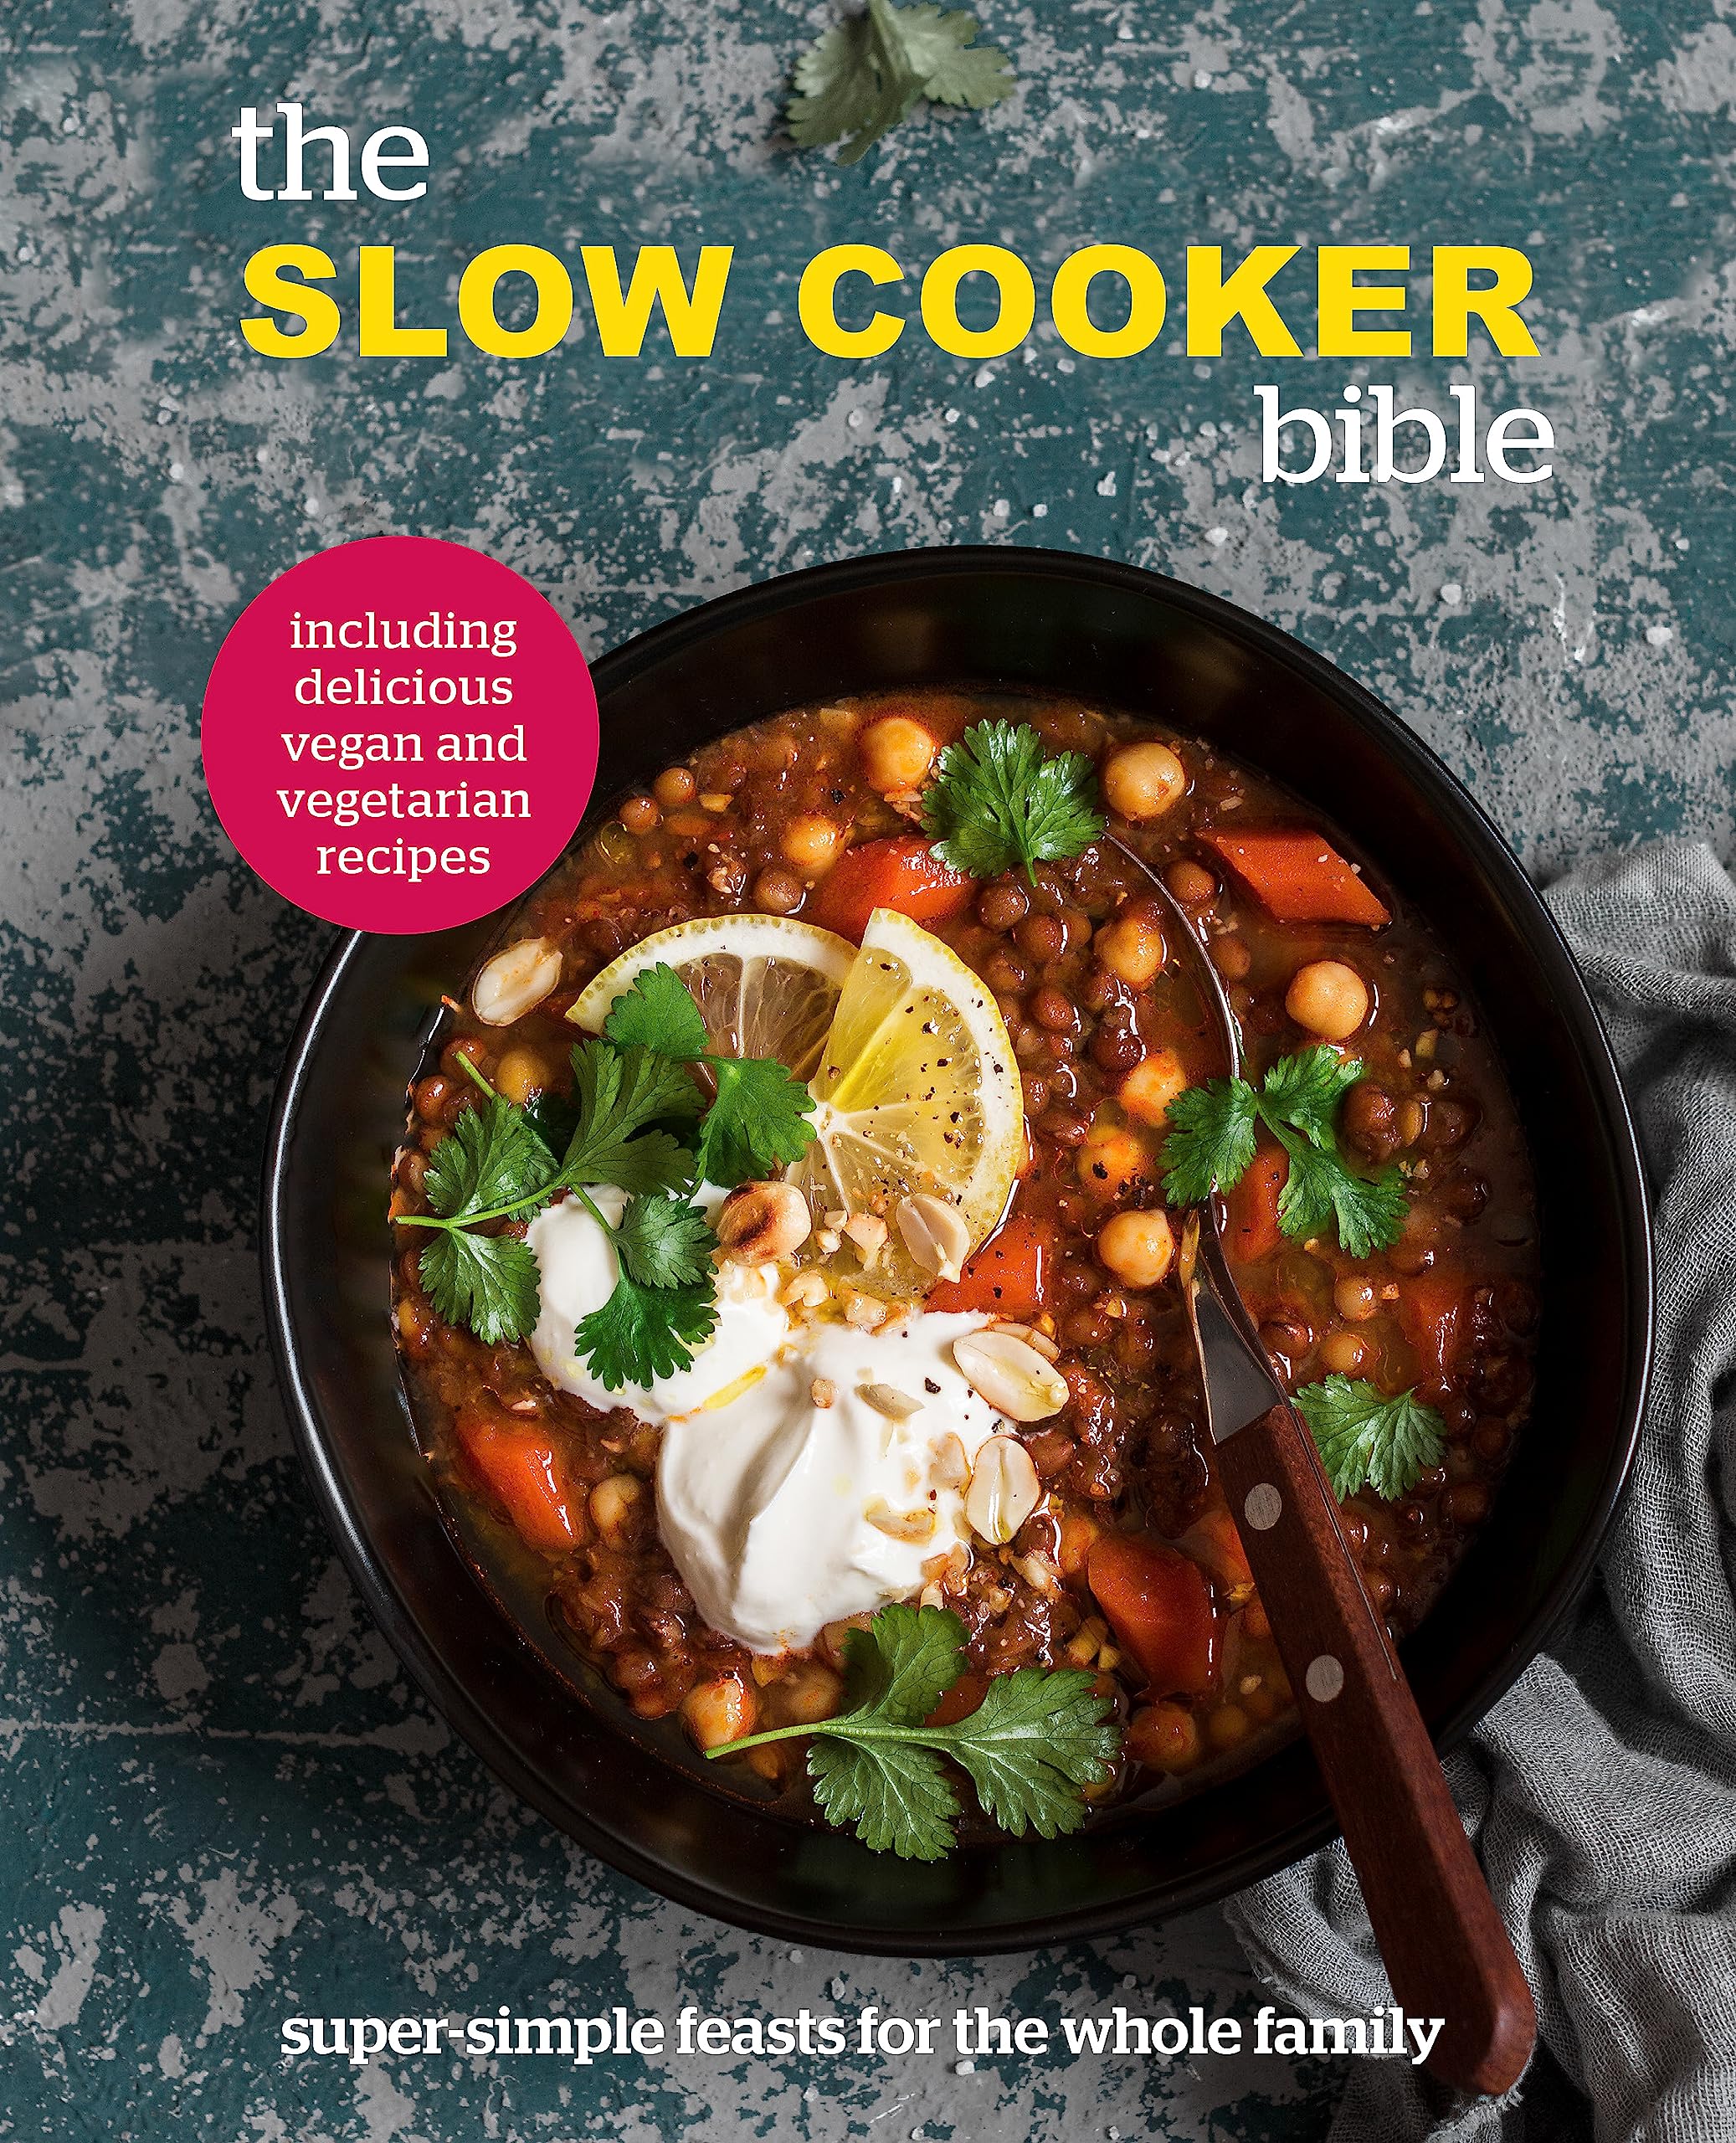 The Slow Cooker Bible: Super Simple Feasts for the Whole Family, Including Delicious Vegan and Vegetarian Recipes